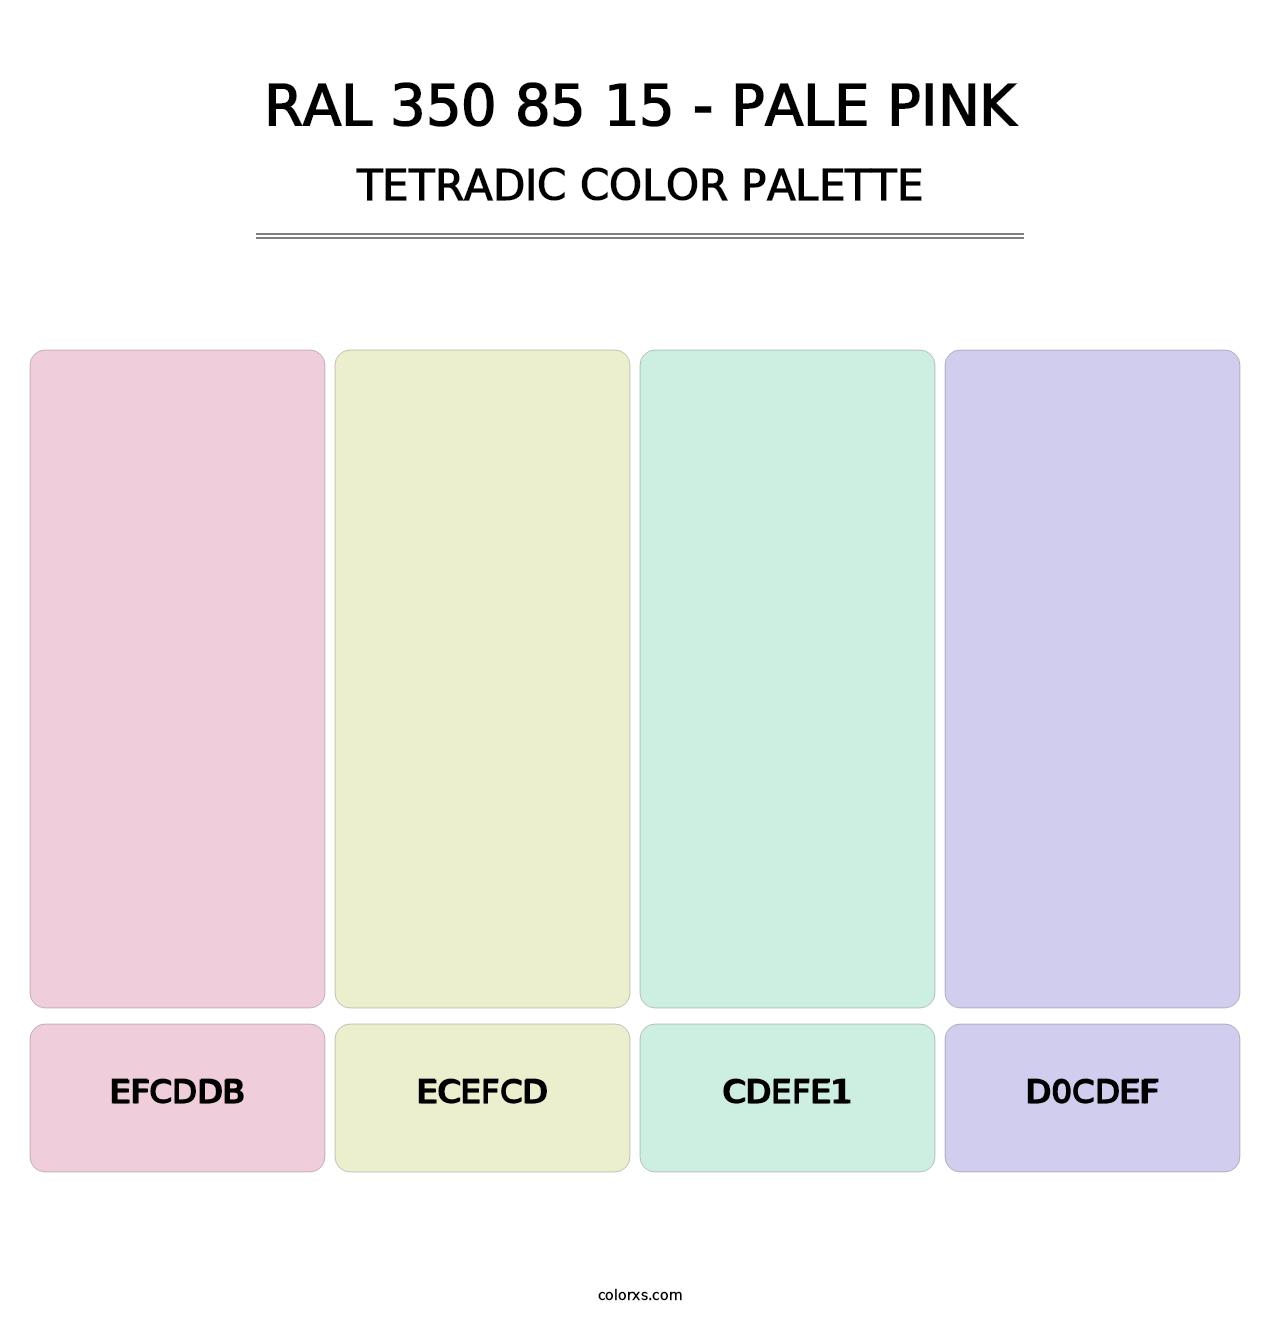 RAL 350 85 15 - Pale Pink - Tetradic Color Palette